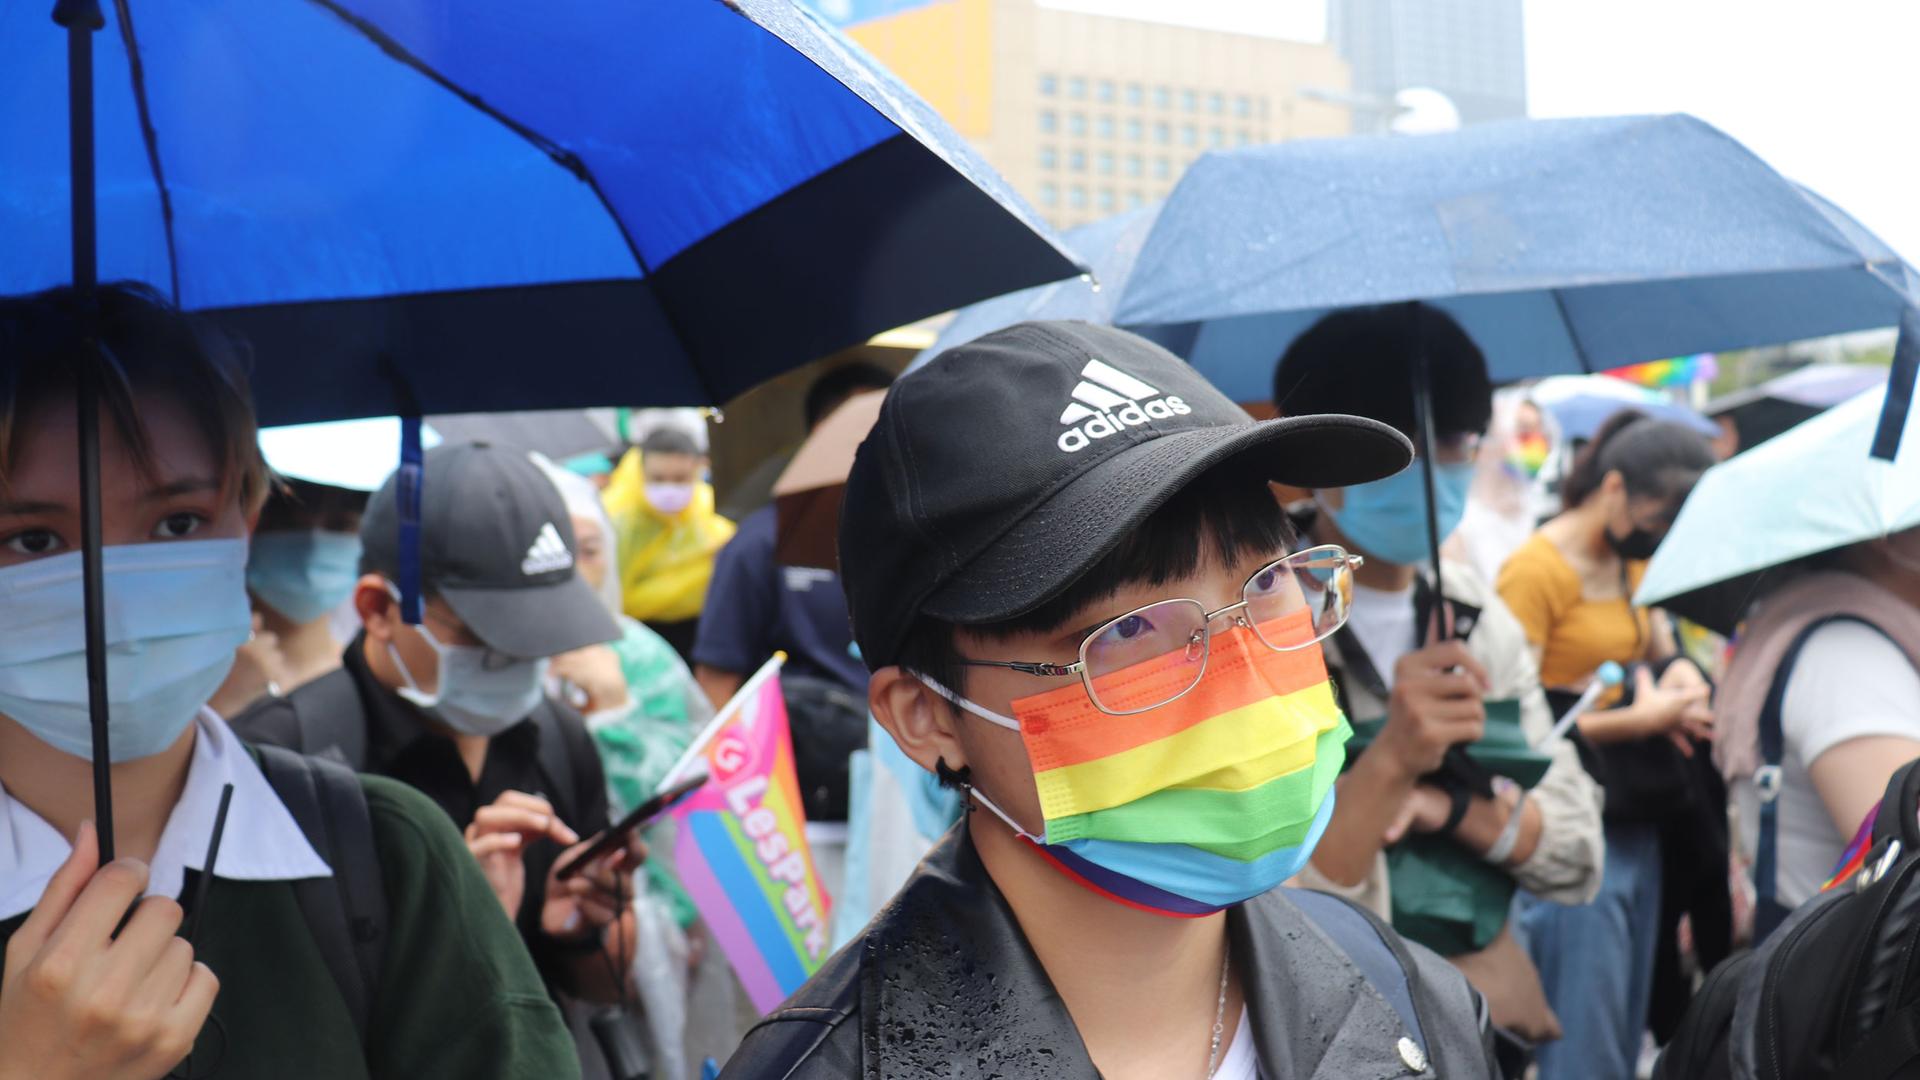 About 120,000 people took part in Pride celebrations in Taipei on Saturday, Oct. 29.